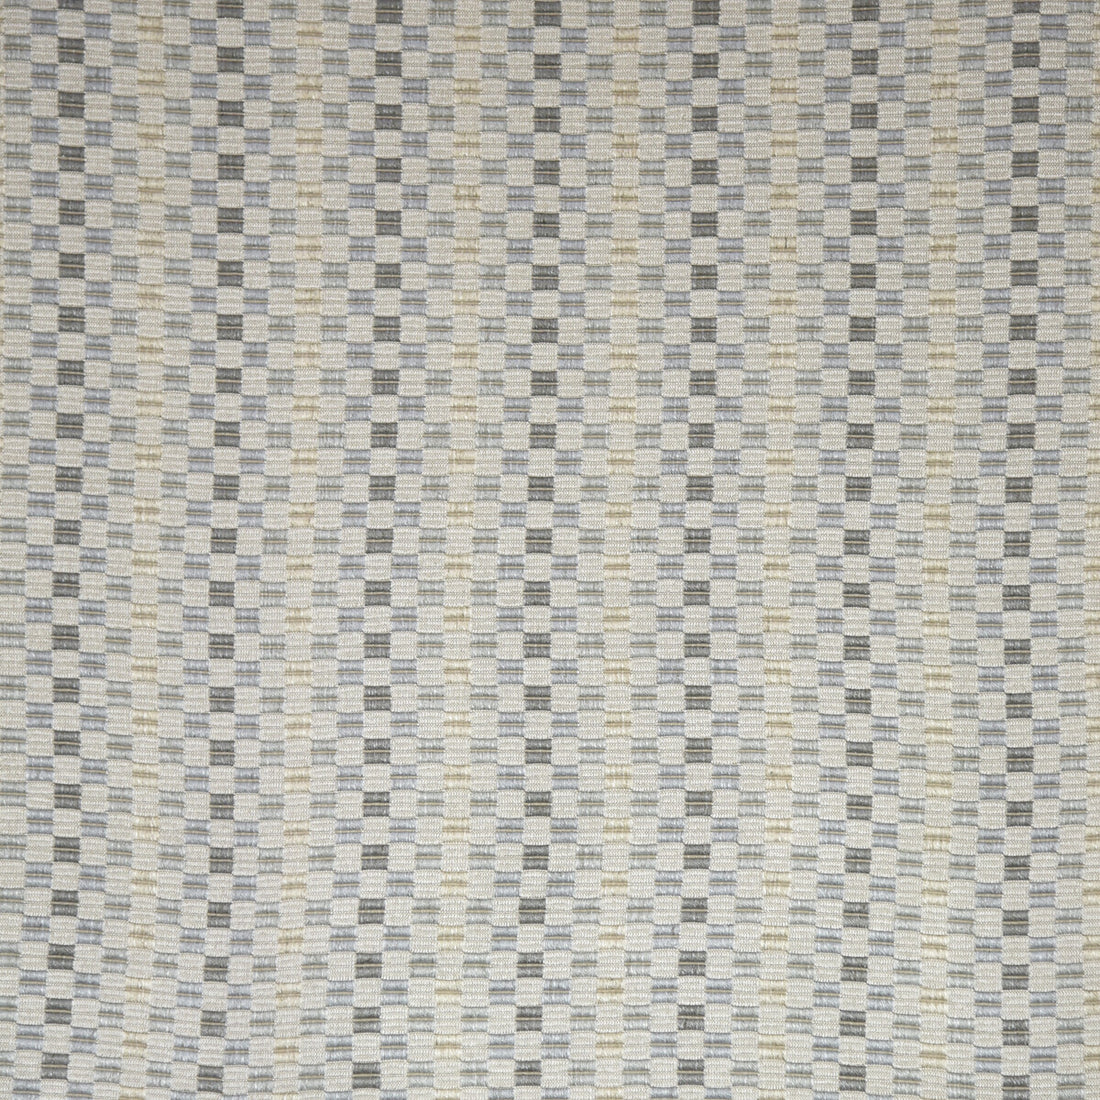 Vernazza fabric in chambray color - pattern 35766.1615.0 - by Kravet Couture in the Modern Colors-Sojourn Collection collection